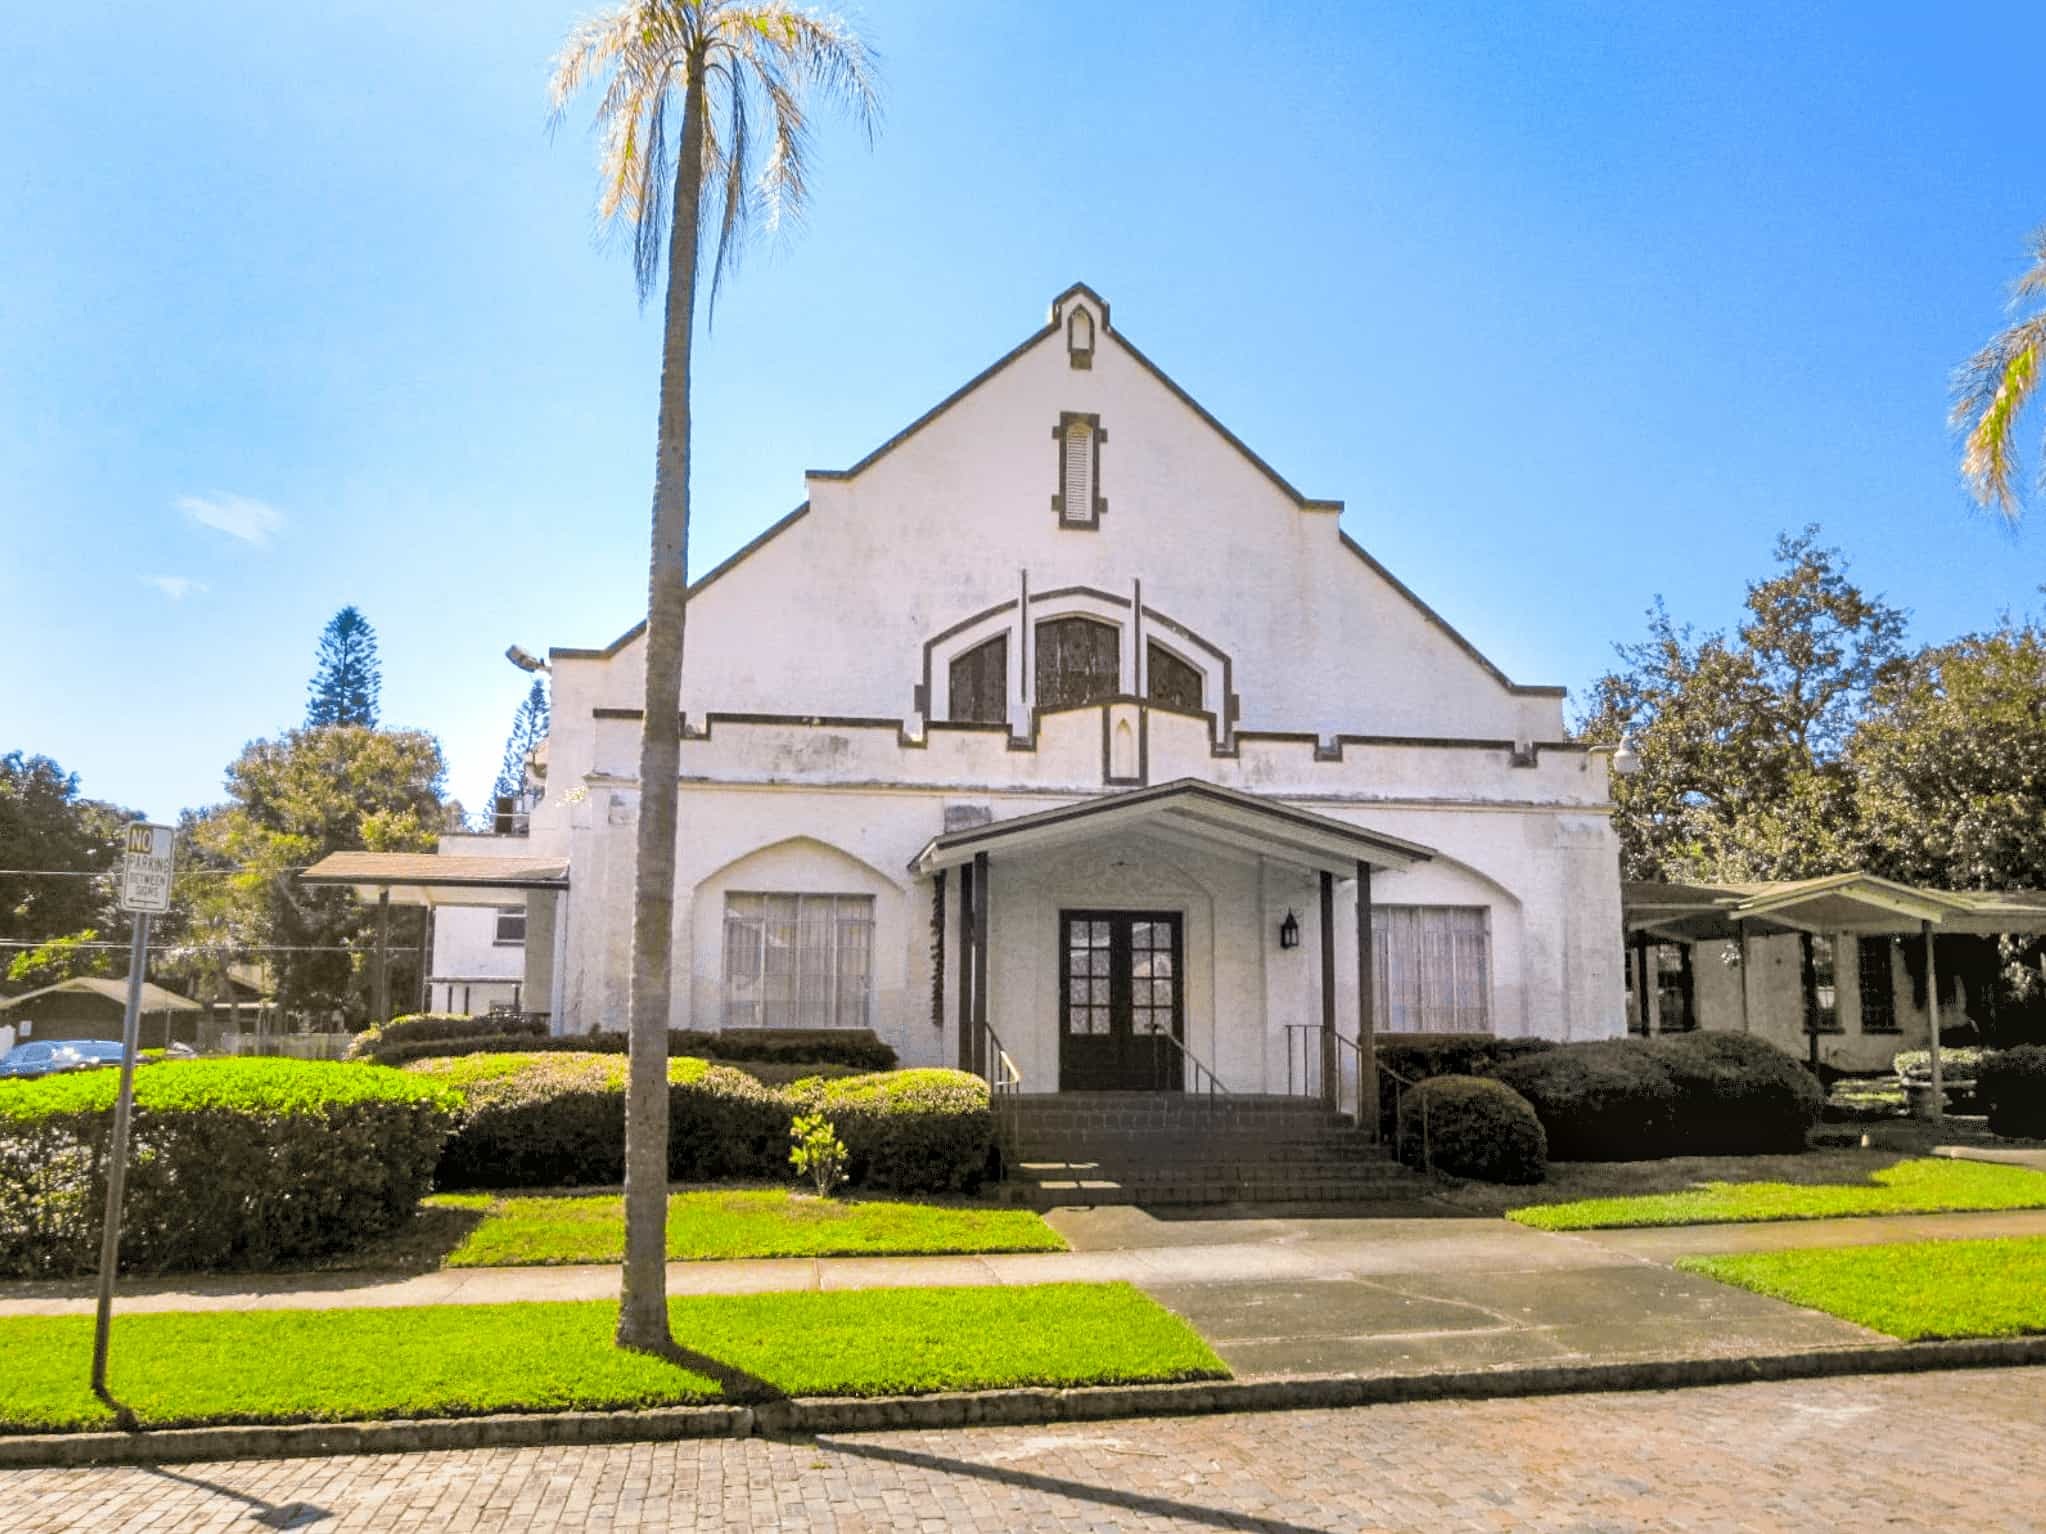 Image of Historic Church Property in the Old Northeast Neighborhood from the street view